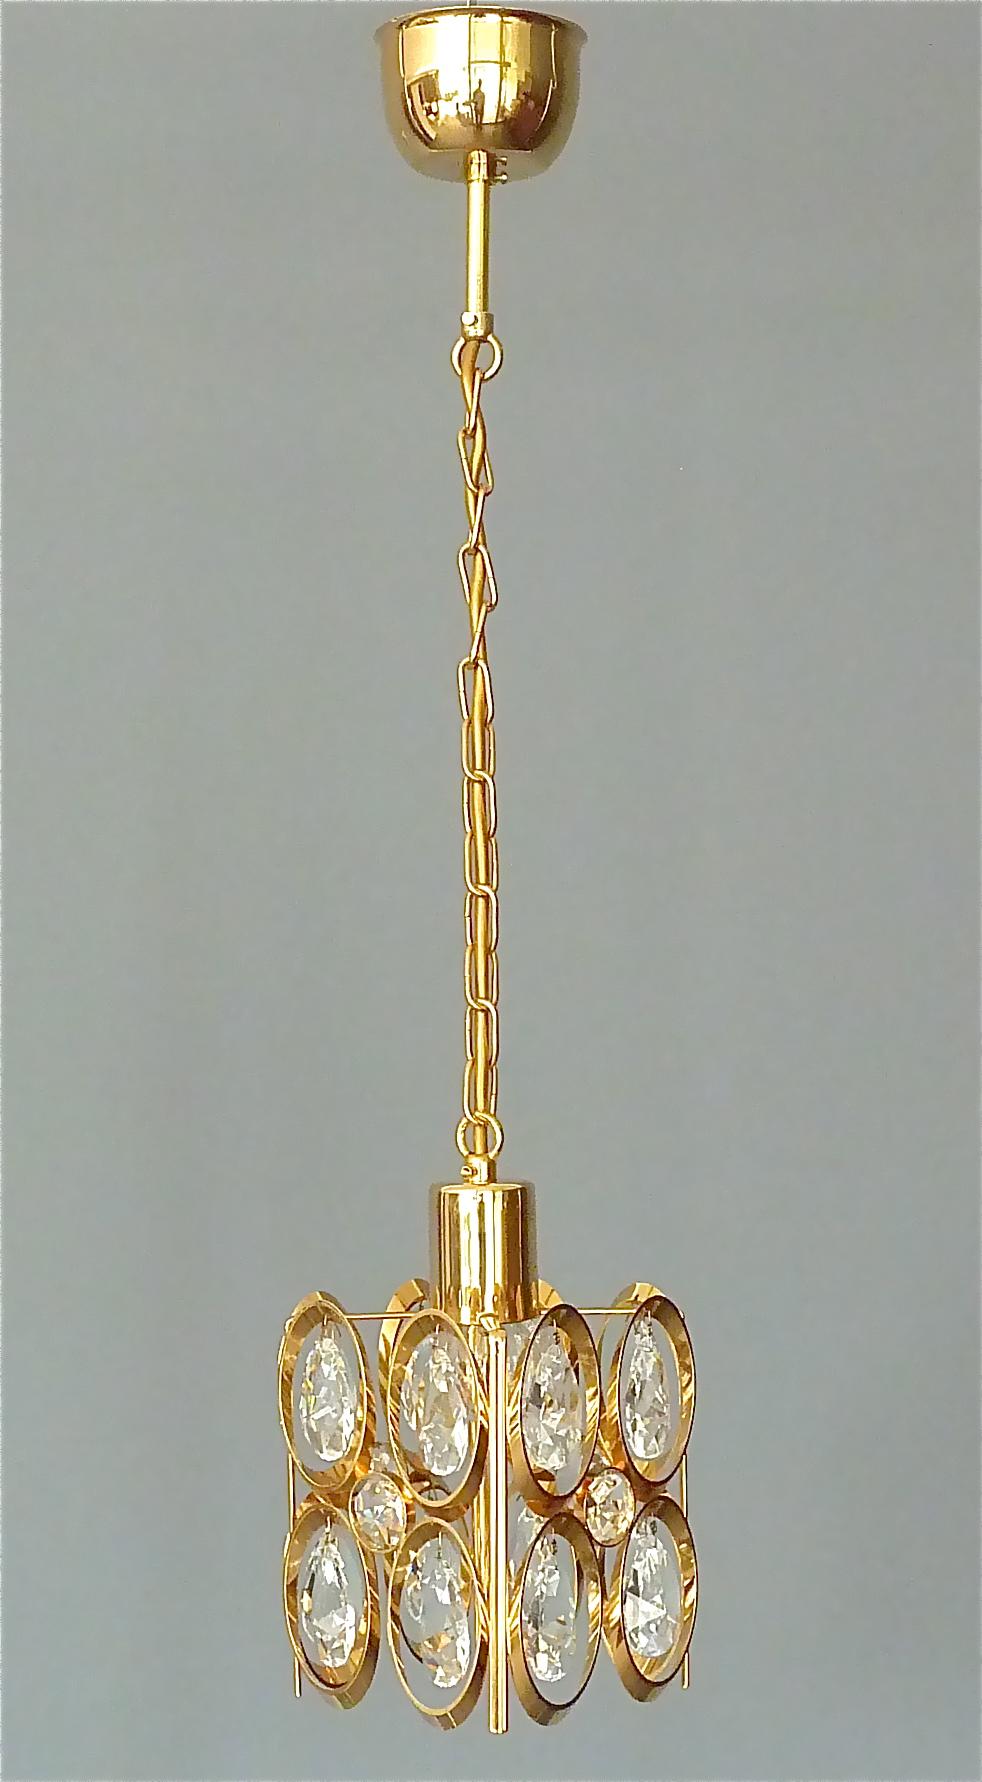 Great gilt brass faceted crystal glass chain hanging pendant lamp made by the famous company Lobmeyr Austria or Palwa Germany, circa 1960. This small but amazing midcentury fixture is made of high quality. It has drop shape and round cut and